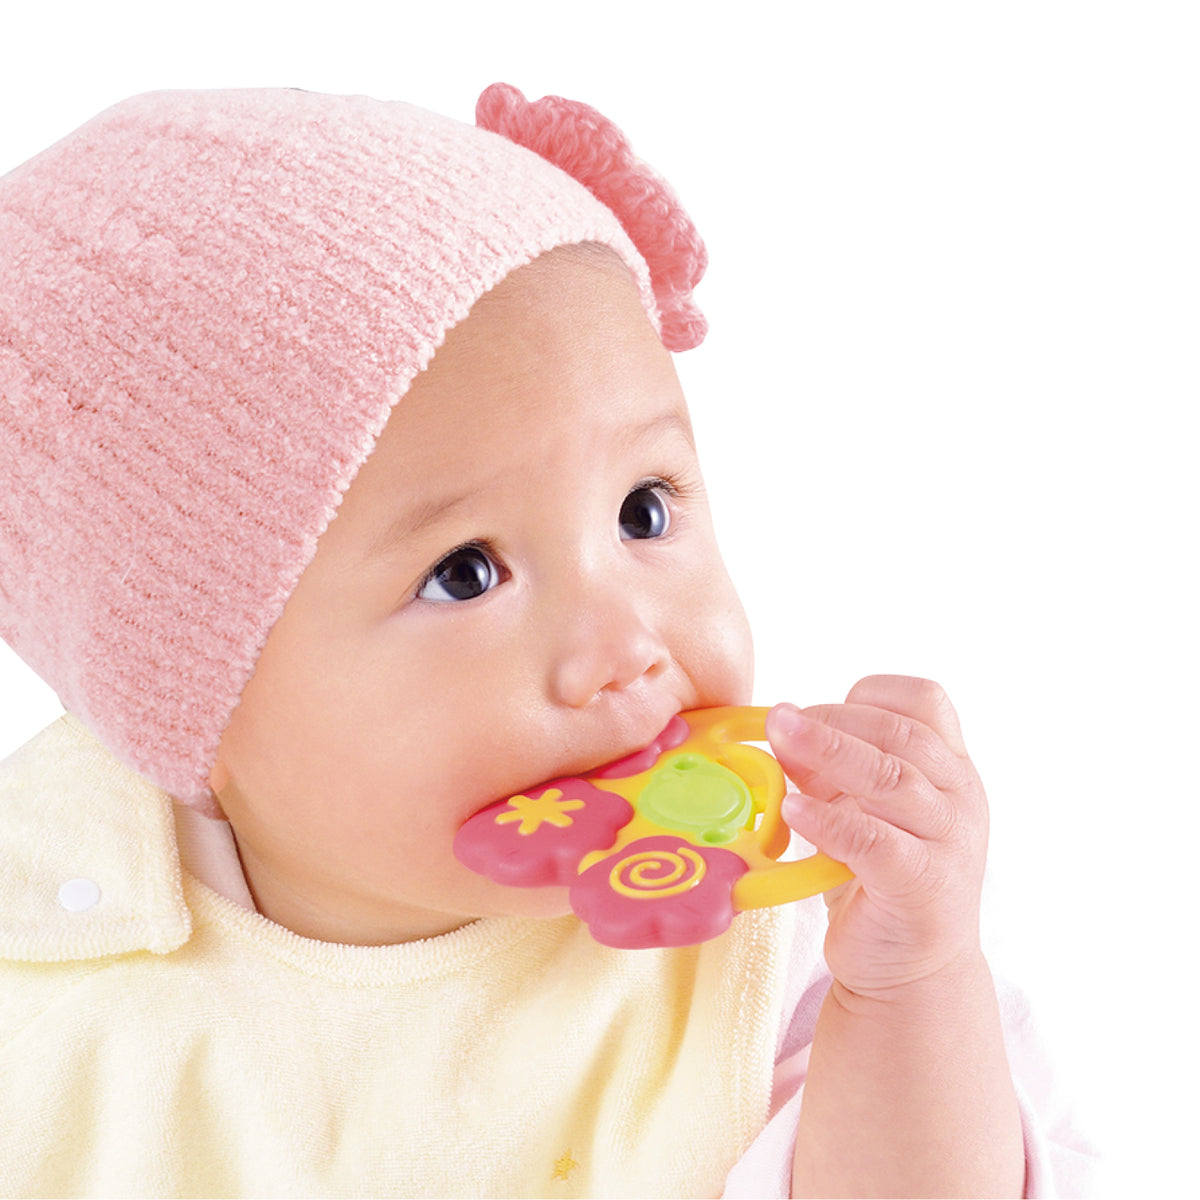 Toyroyal Love of Mom Series - Smiley Rattle Teether